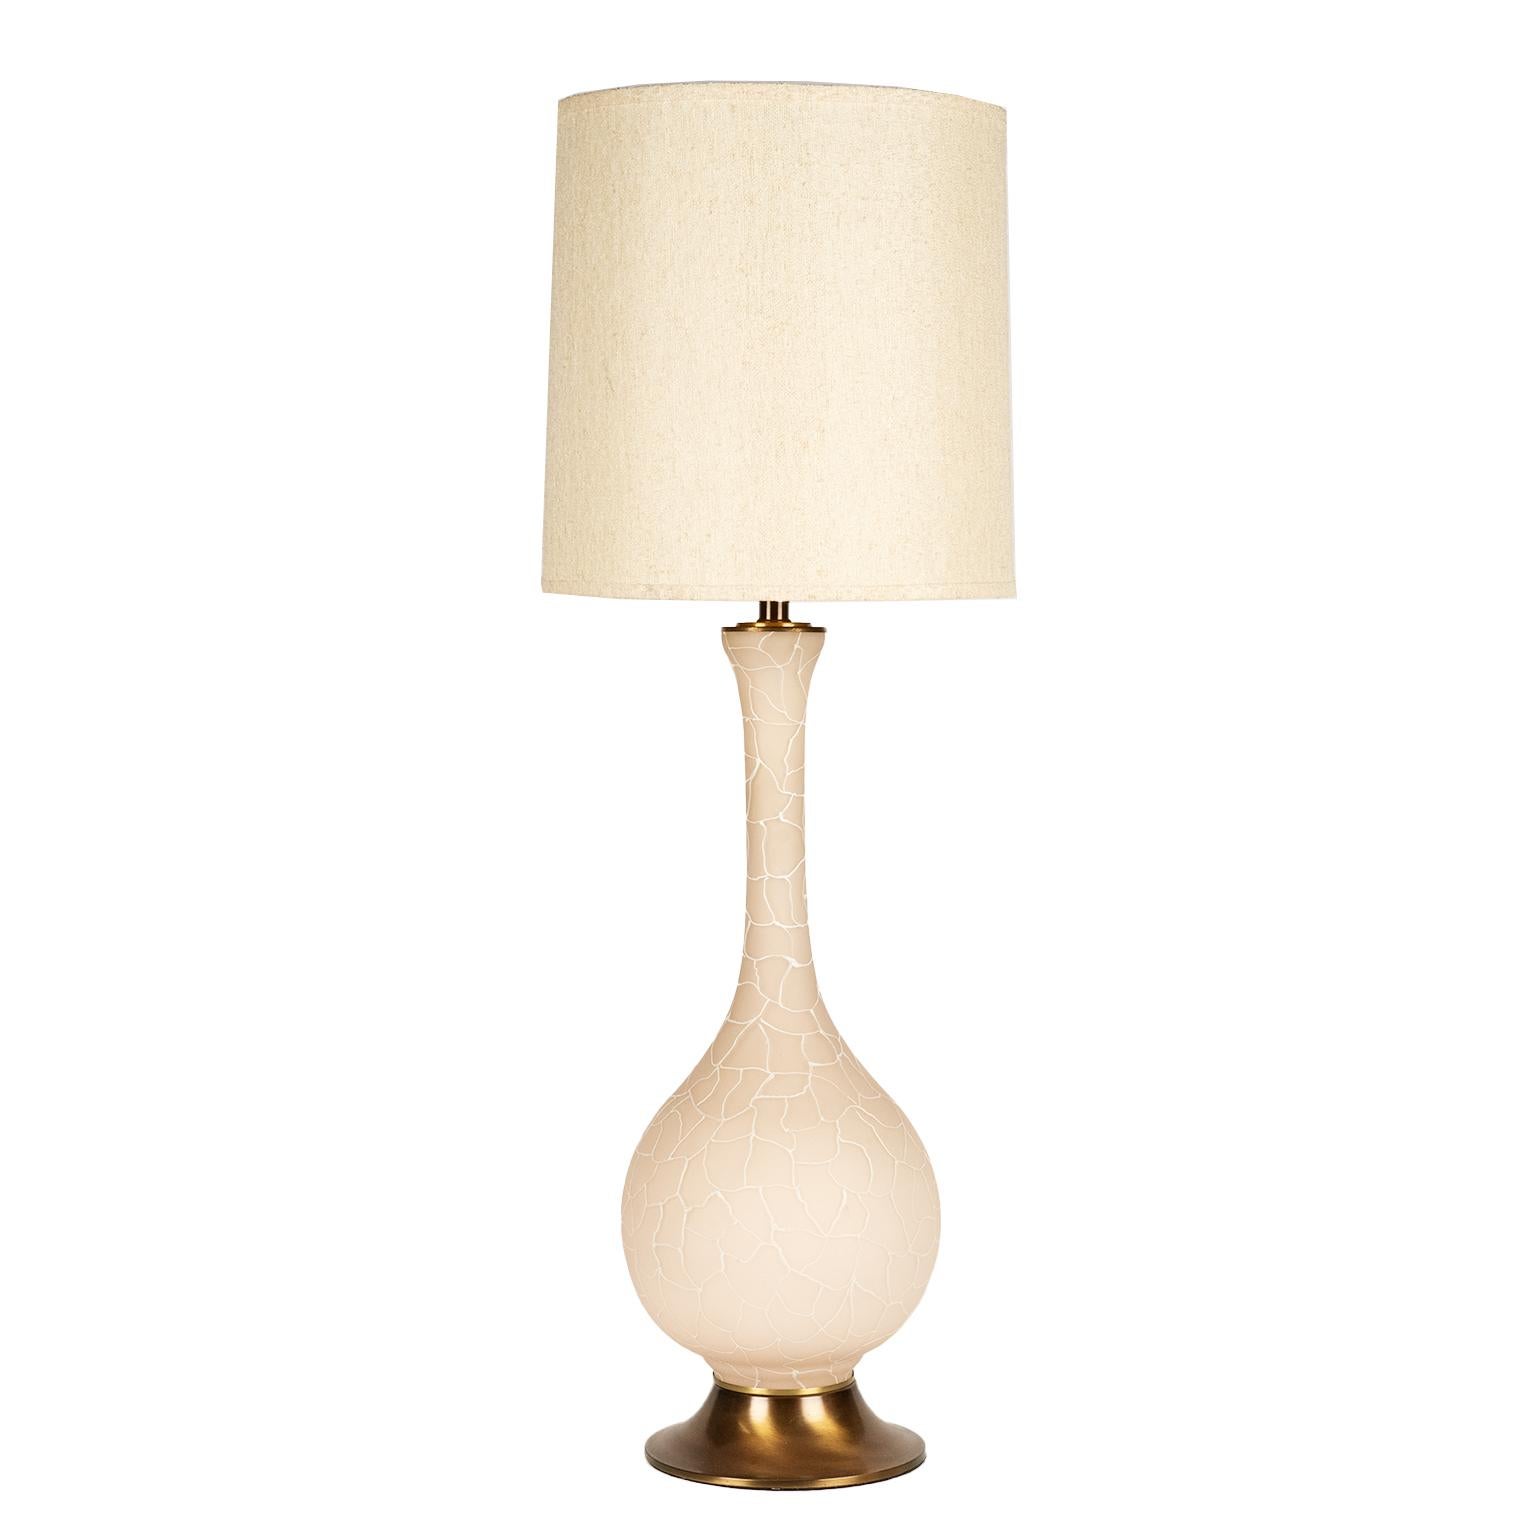 These tall and impressive soft pale blush tone lamps are fitted with their original
